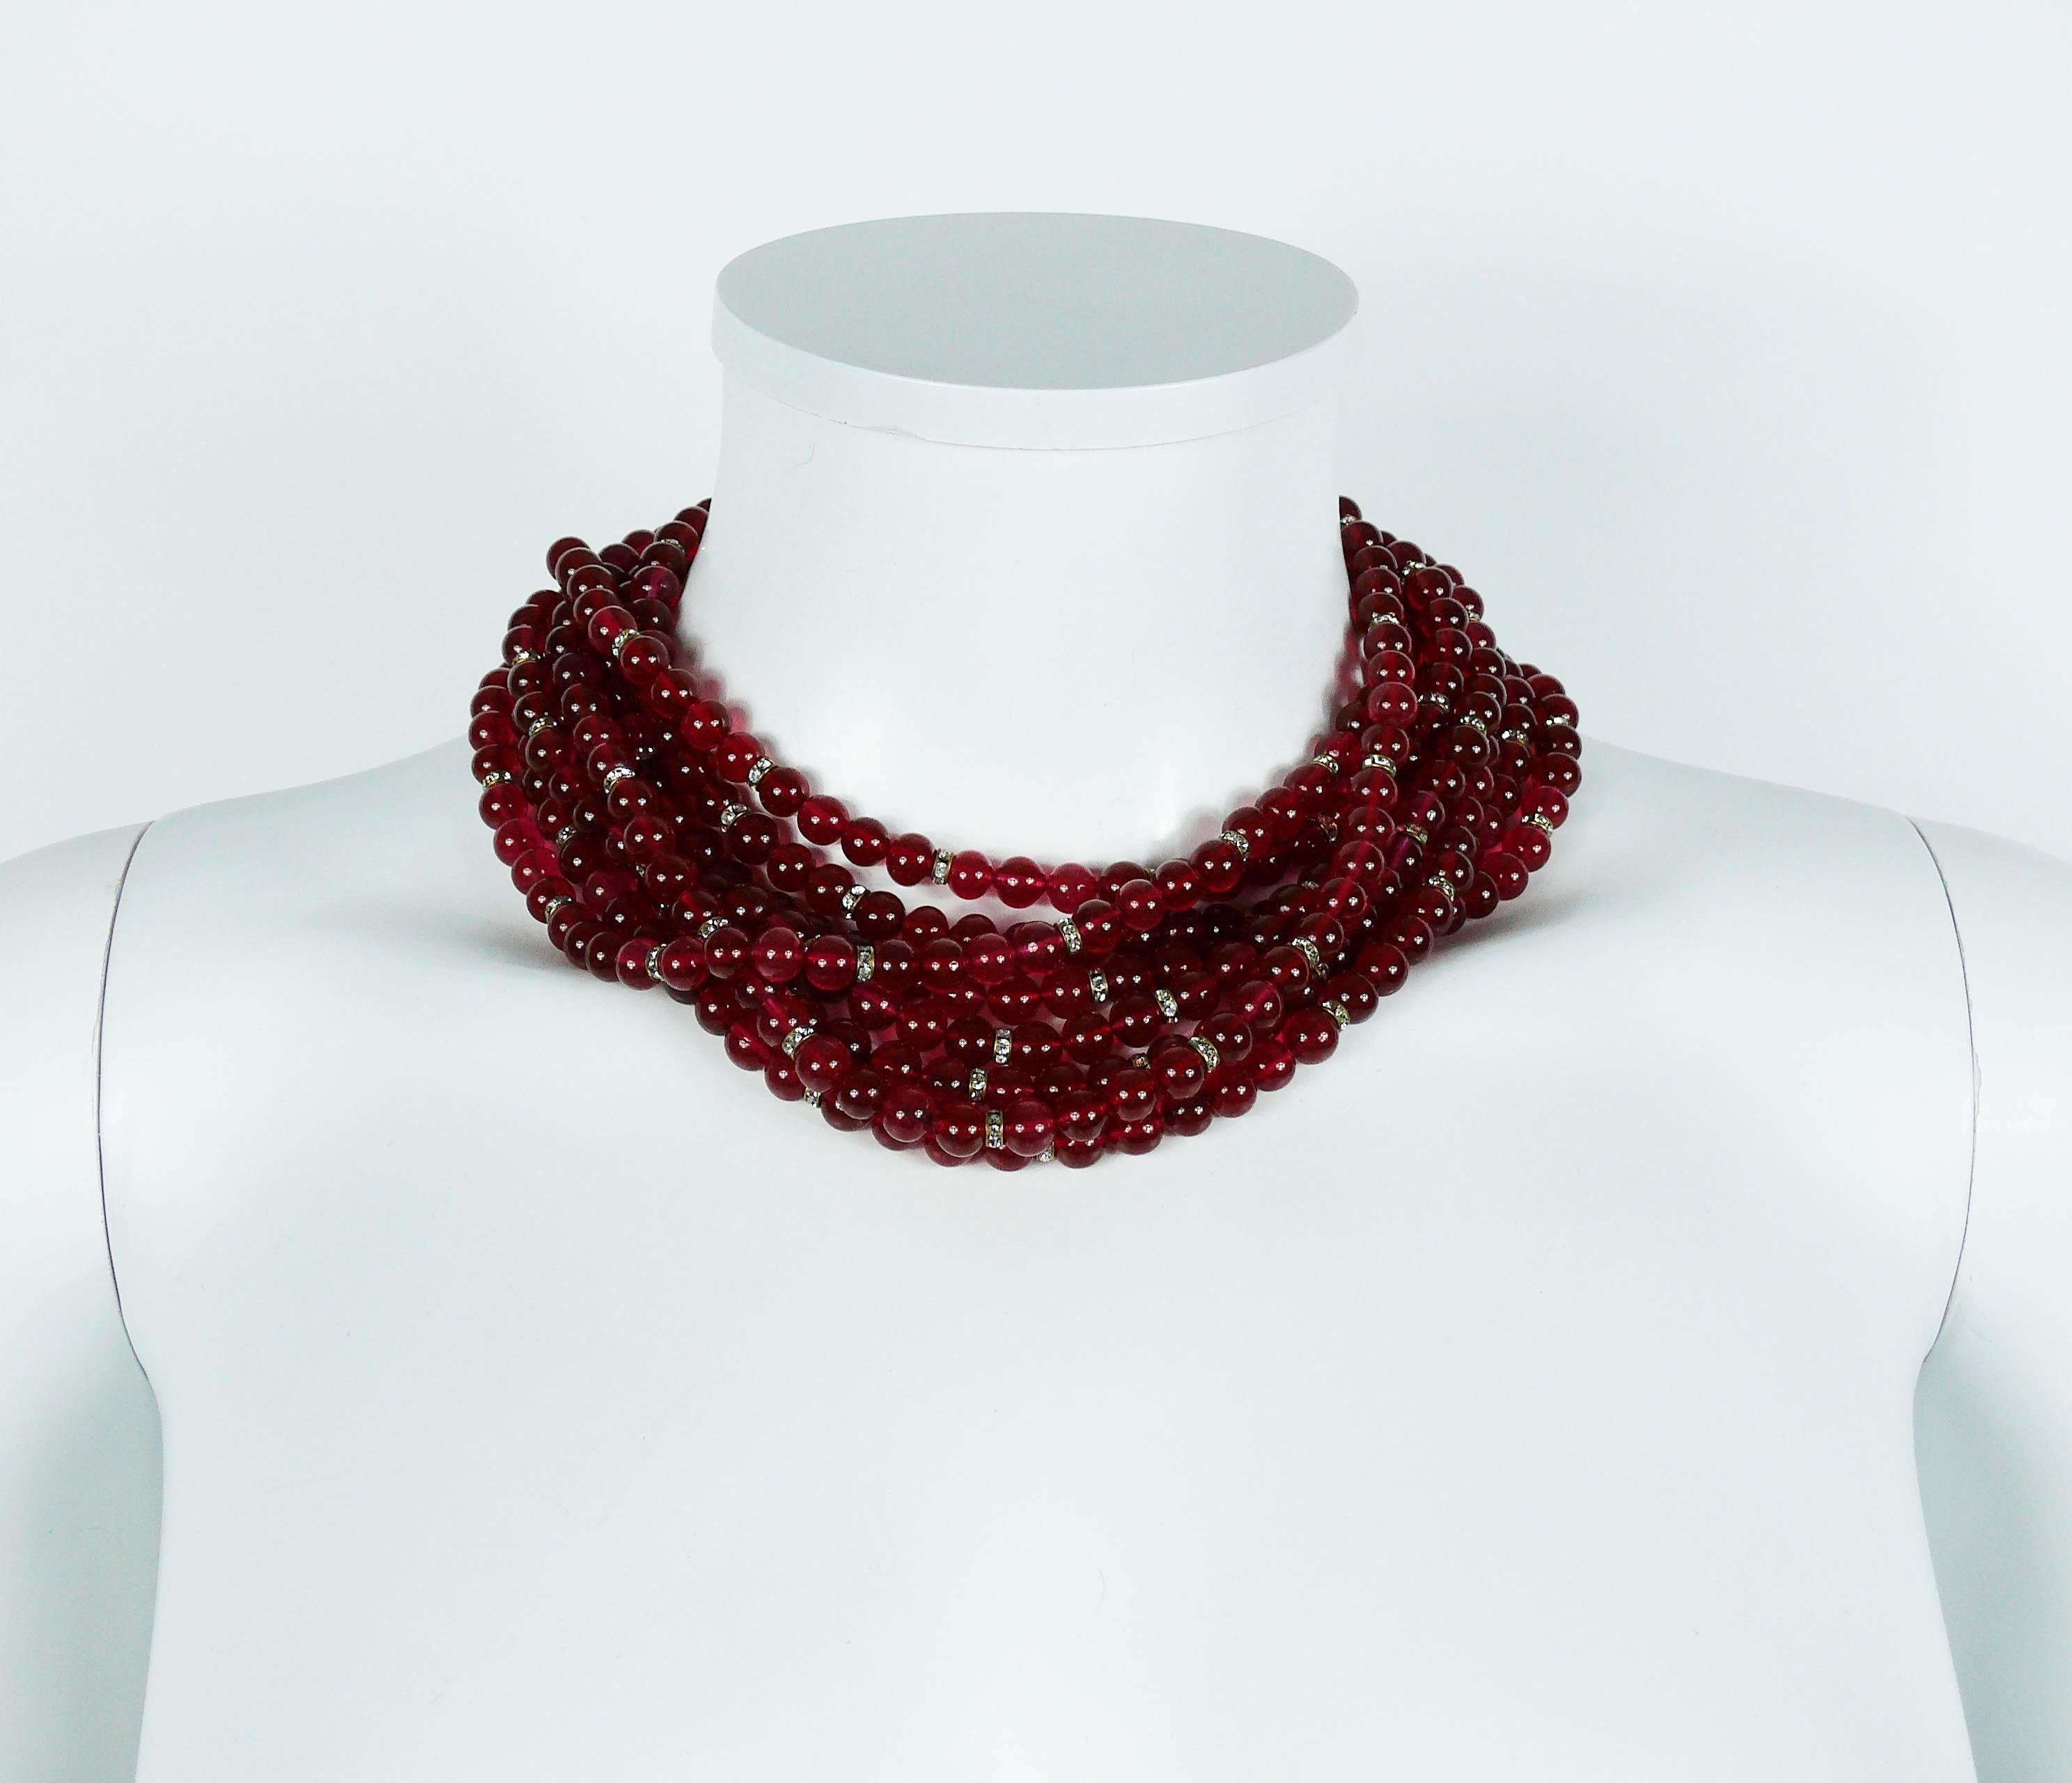 CHANEL vintage multi-strand necklace featuring ruby glass beads and clear crystal rondelles.

Circa 1971-1980.

Gorgeous openwork design gold toned clasp with clear crystal embellishement.

Hook clasp.
Extension chain.

Marked CHANEL Made in